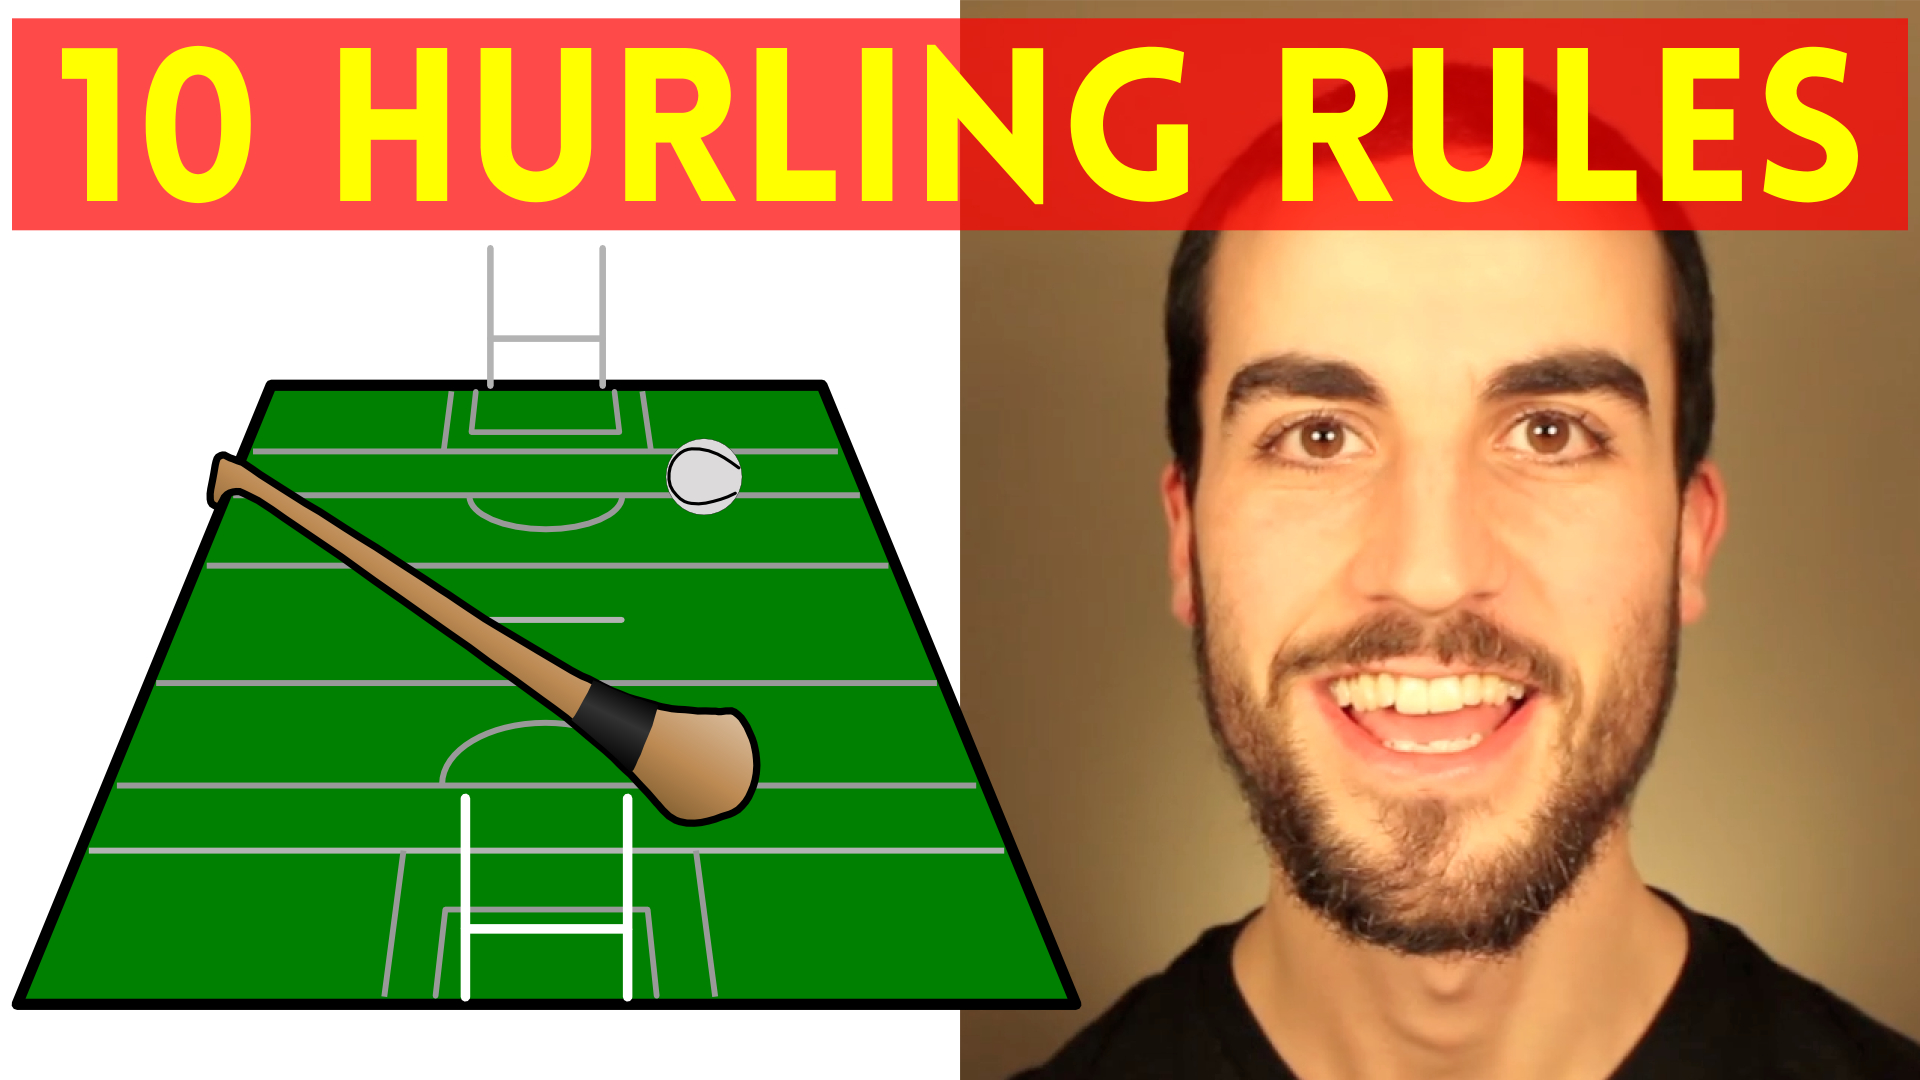 Hurl. Rules player